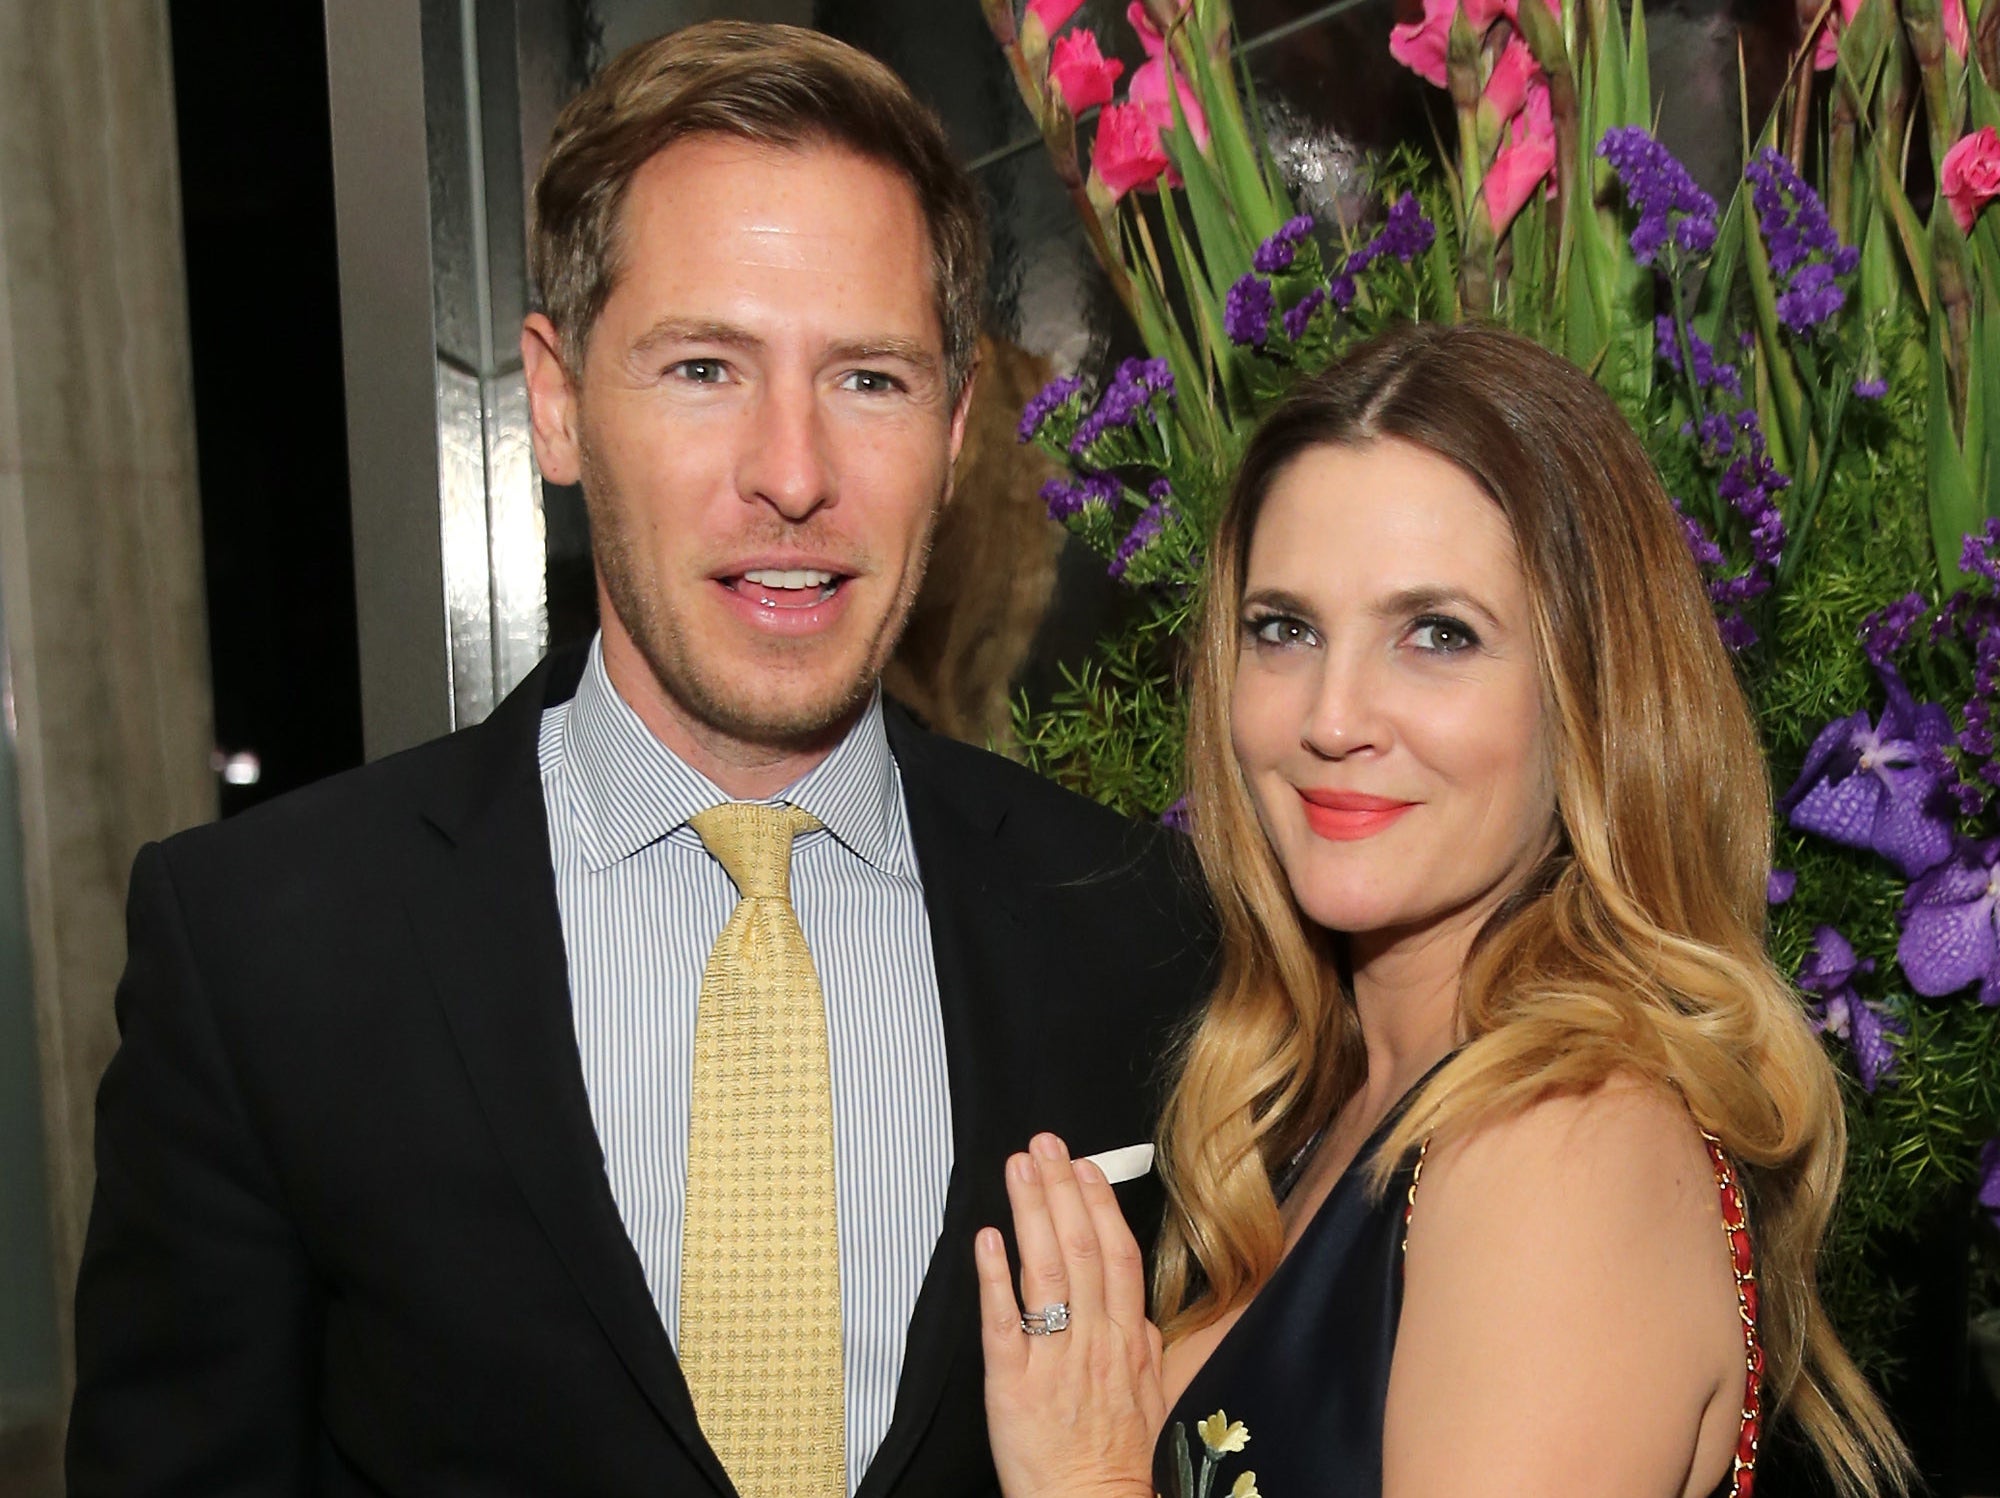 Drew Barrymore and husband Will Kopelman at a movie screening